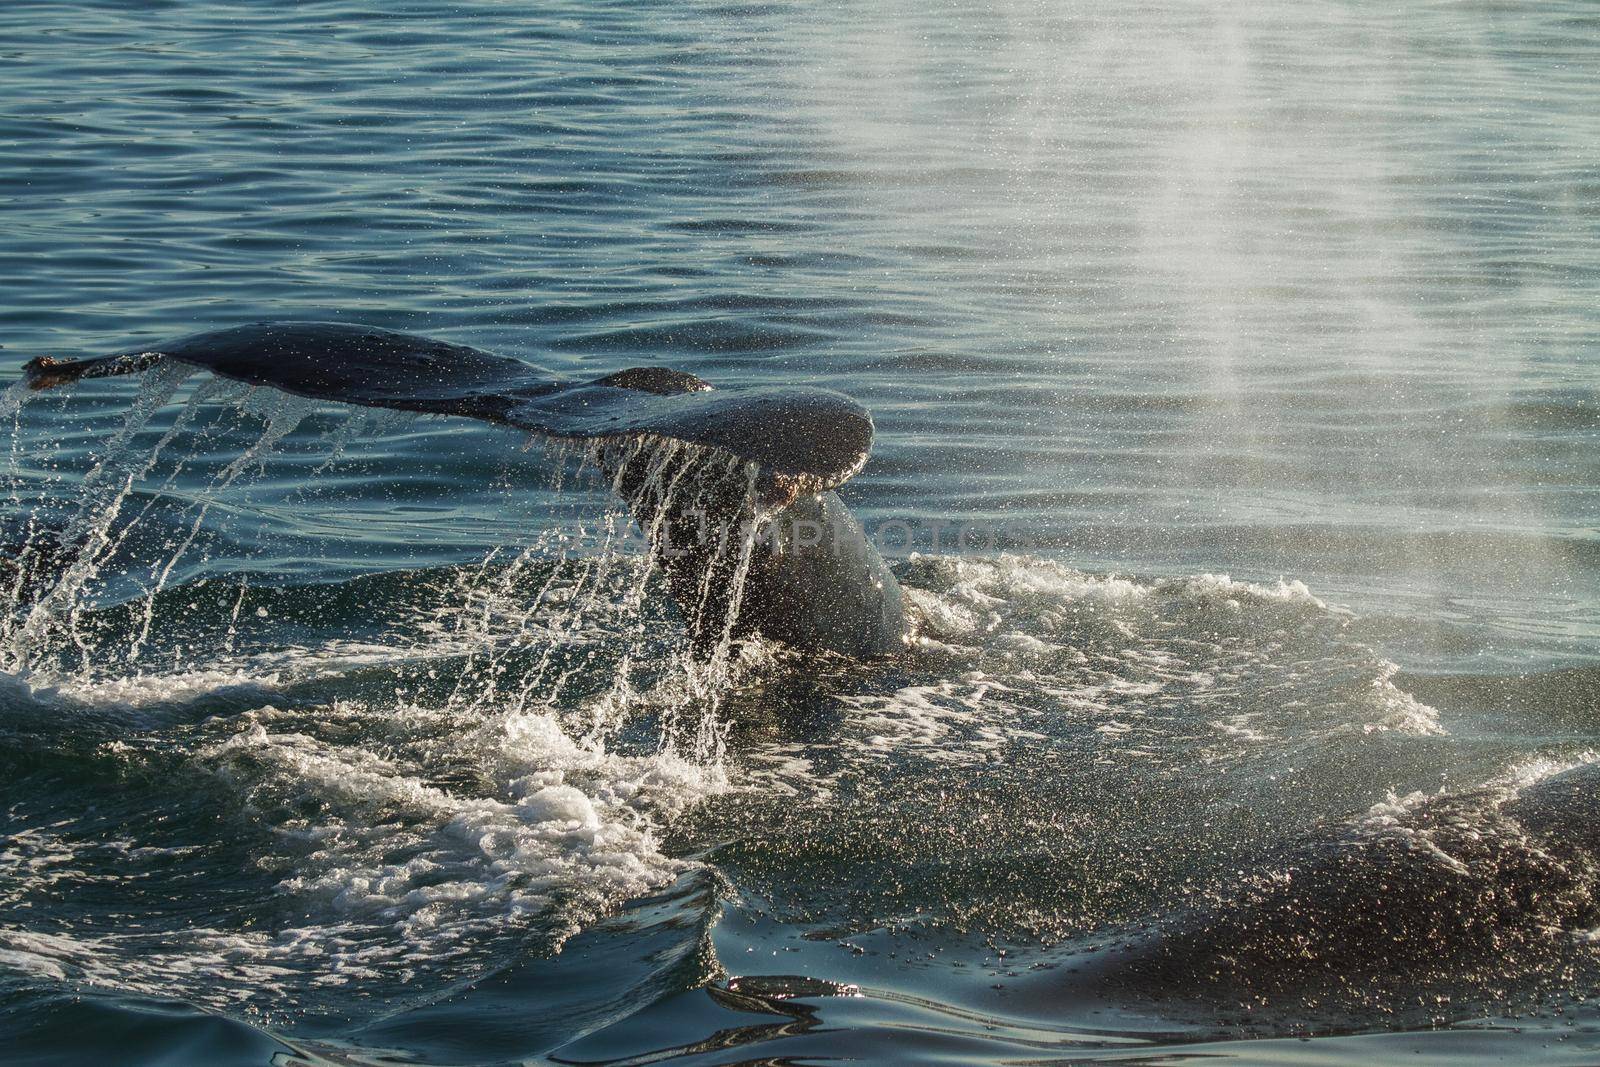 The Tail of a Humpback Whale When Diving. Backlight Emphasis All the Splash and Drops of Water.